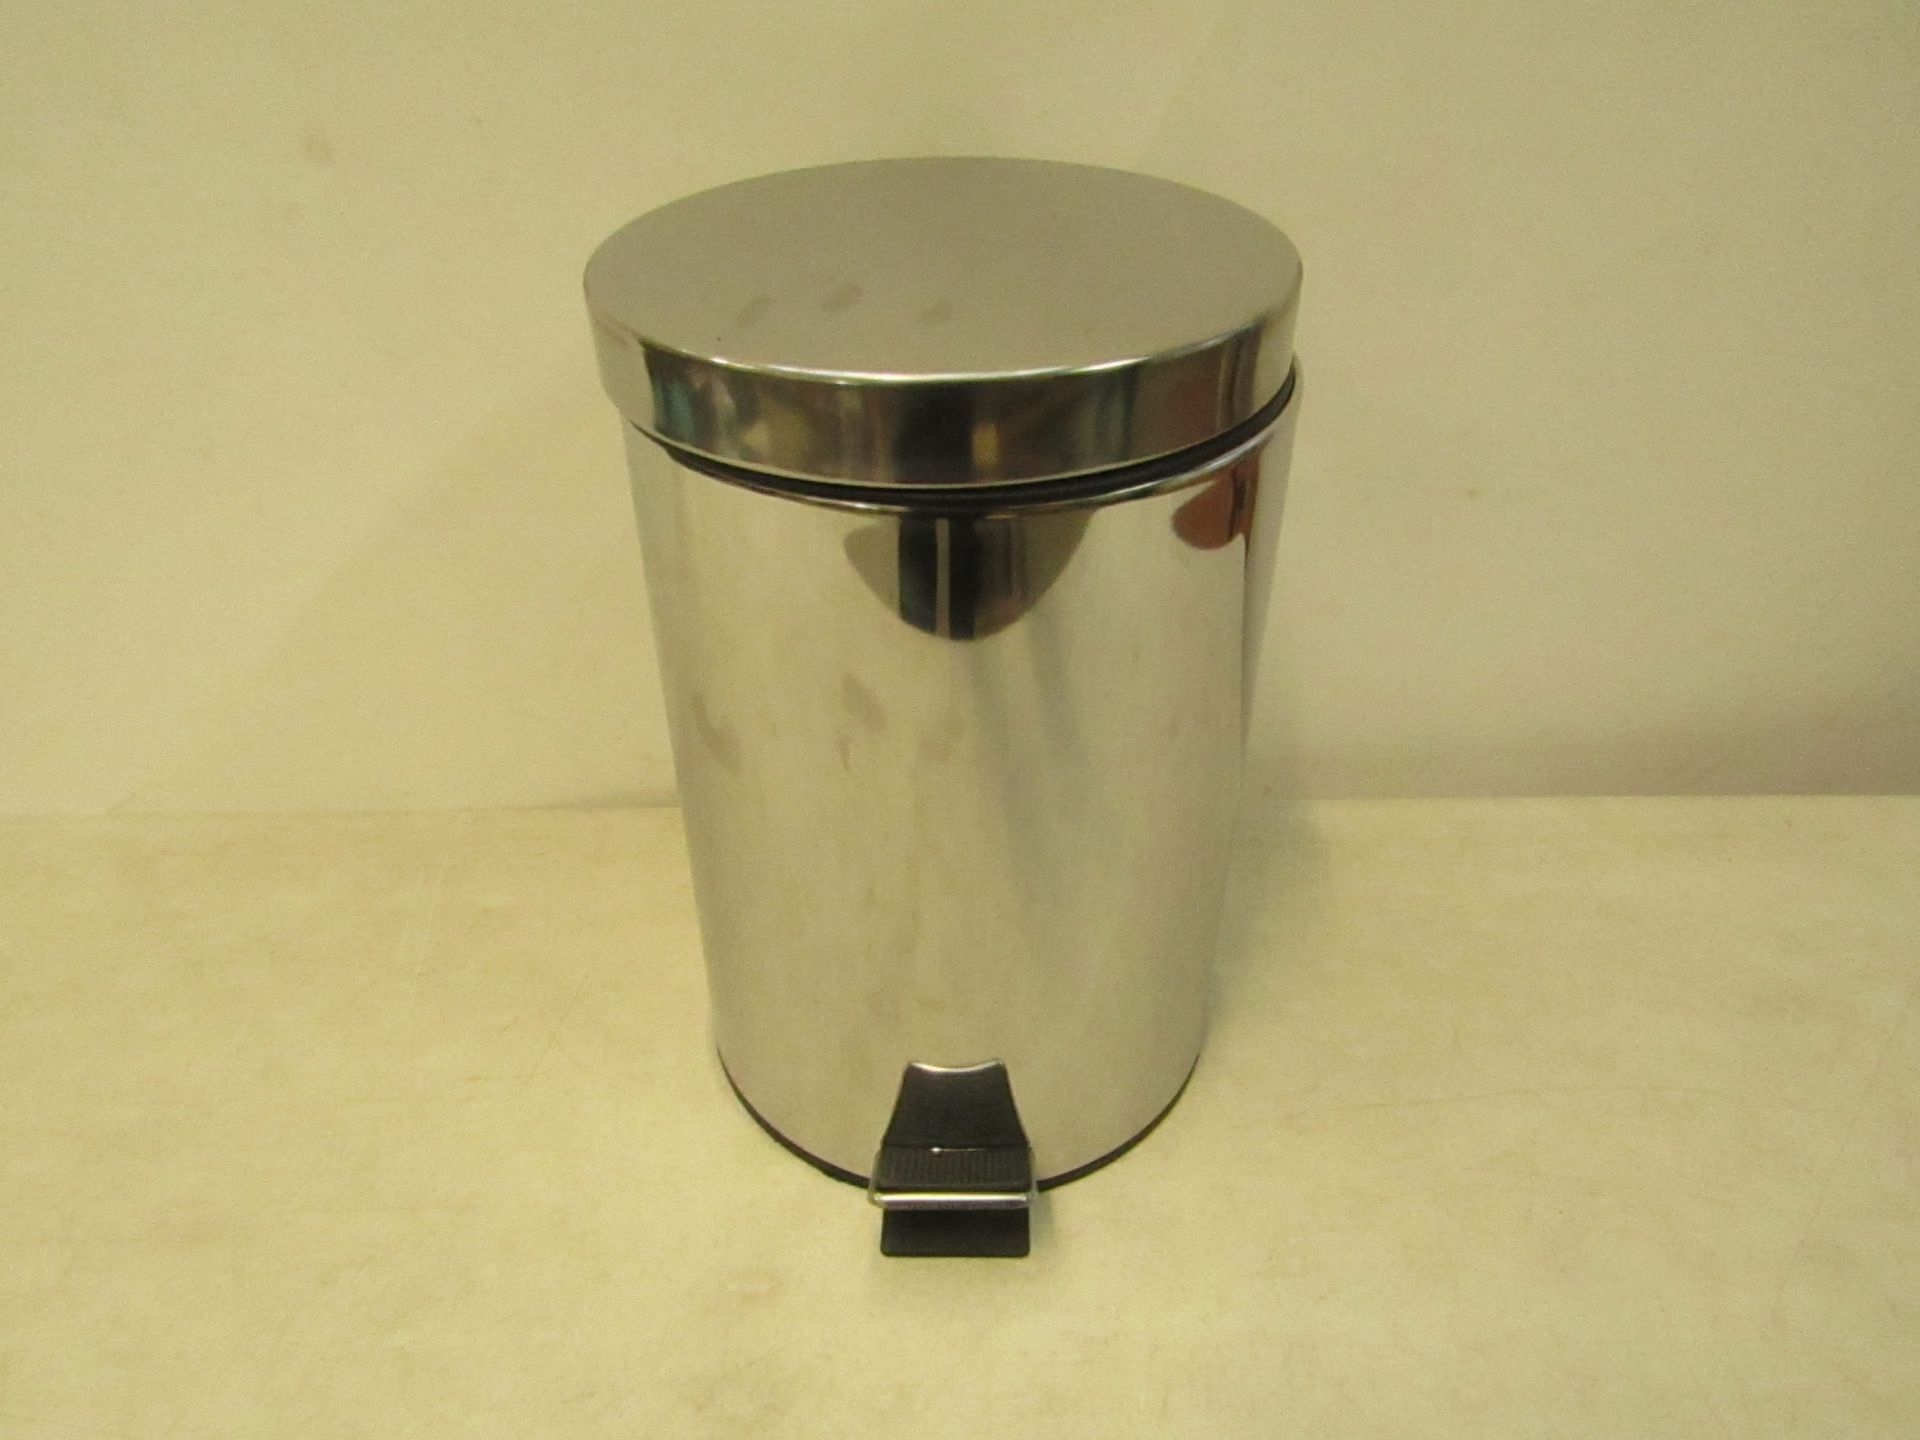 7L Pedal chrome bin, new and boxed.